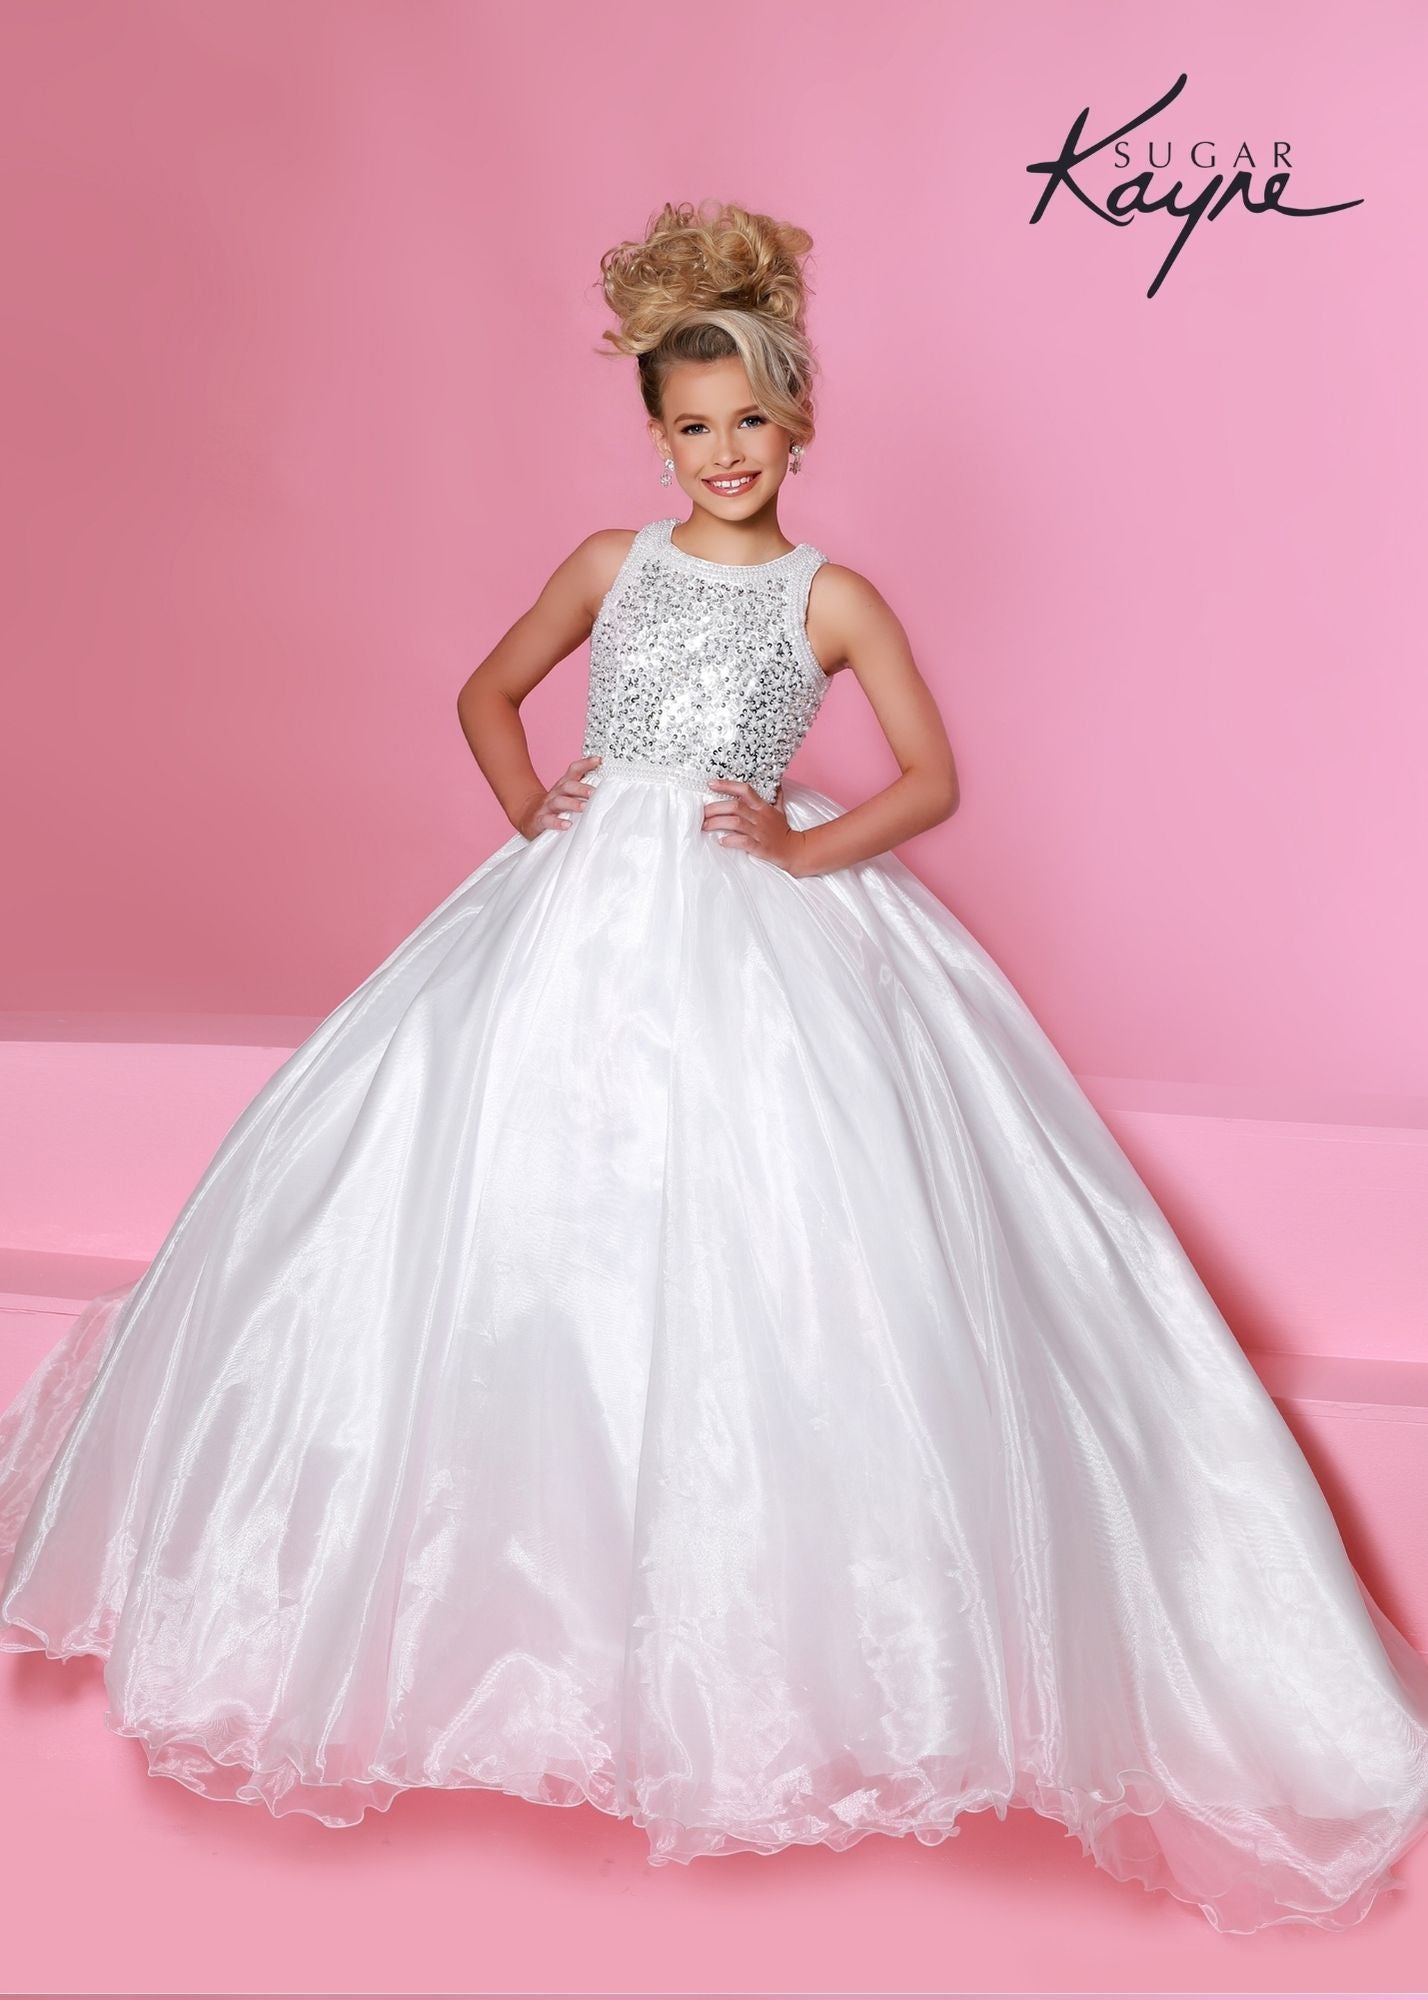    Sugar-Kayne-C186-Petal-Pink-Girls-Pageant-Dress-SequinPearl-encrusted-top-heart-cutout-in-the-back-long-organza-ballgown-skirt-with-train